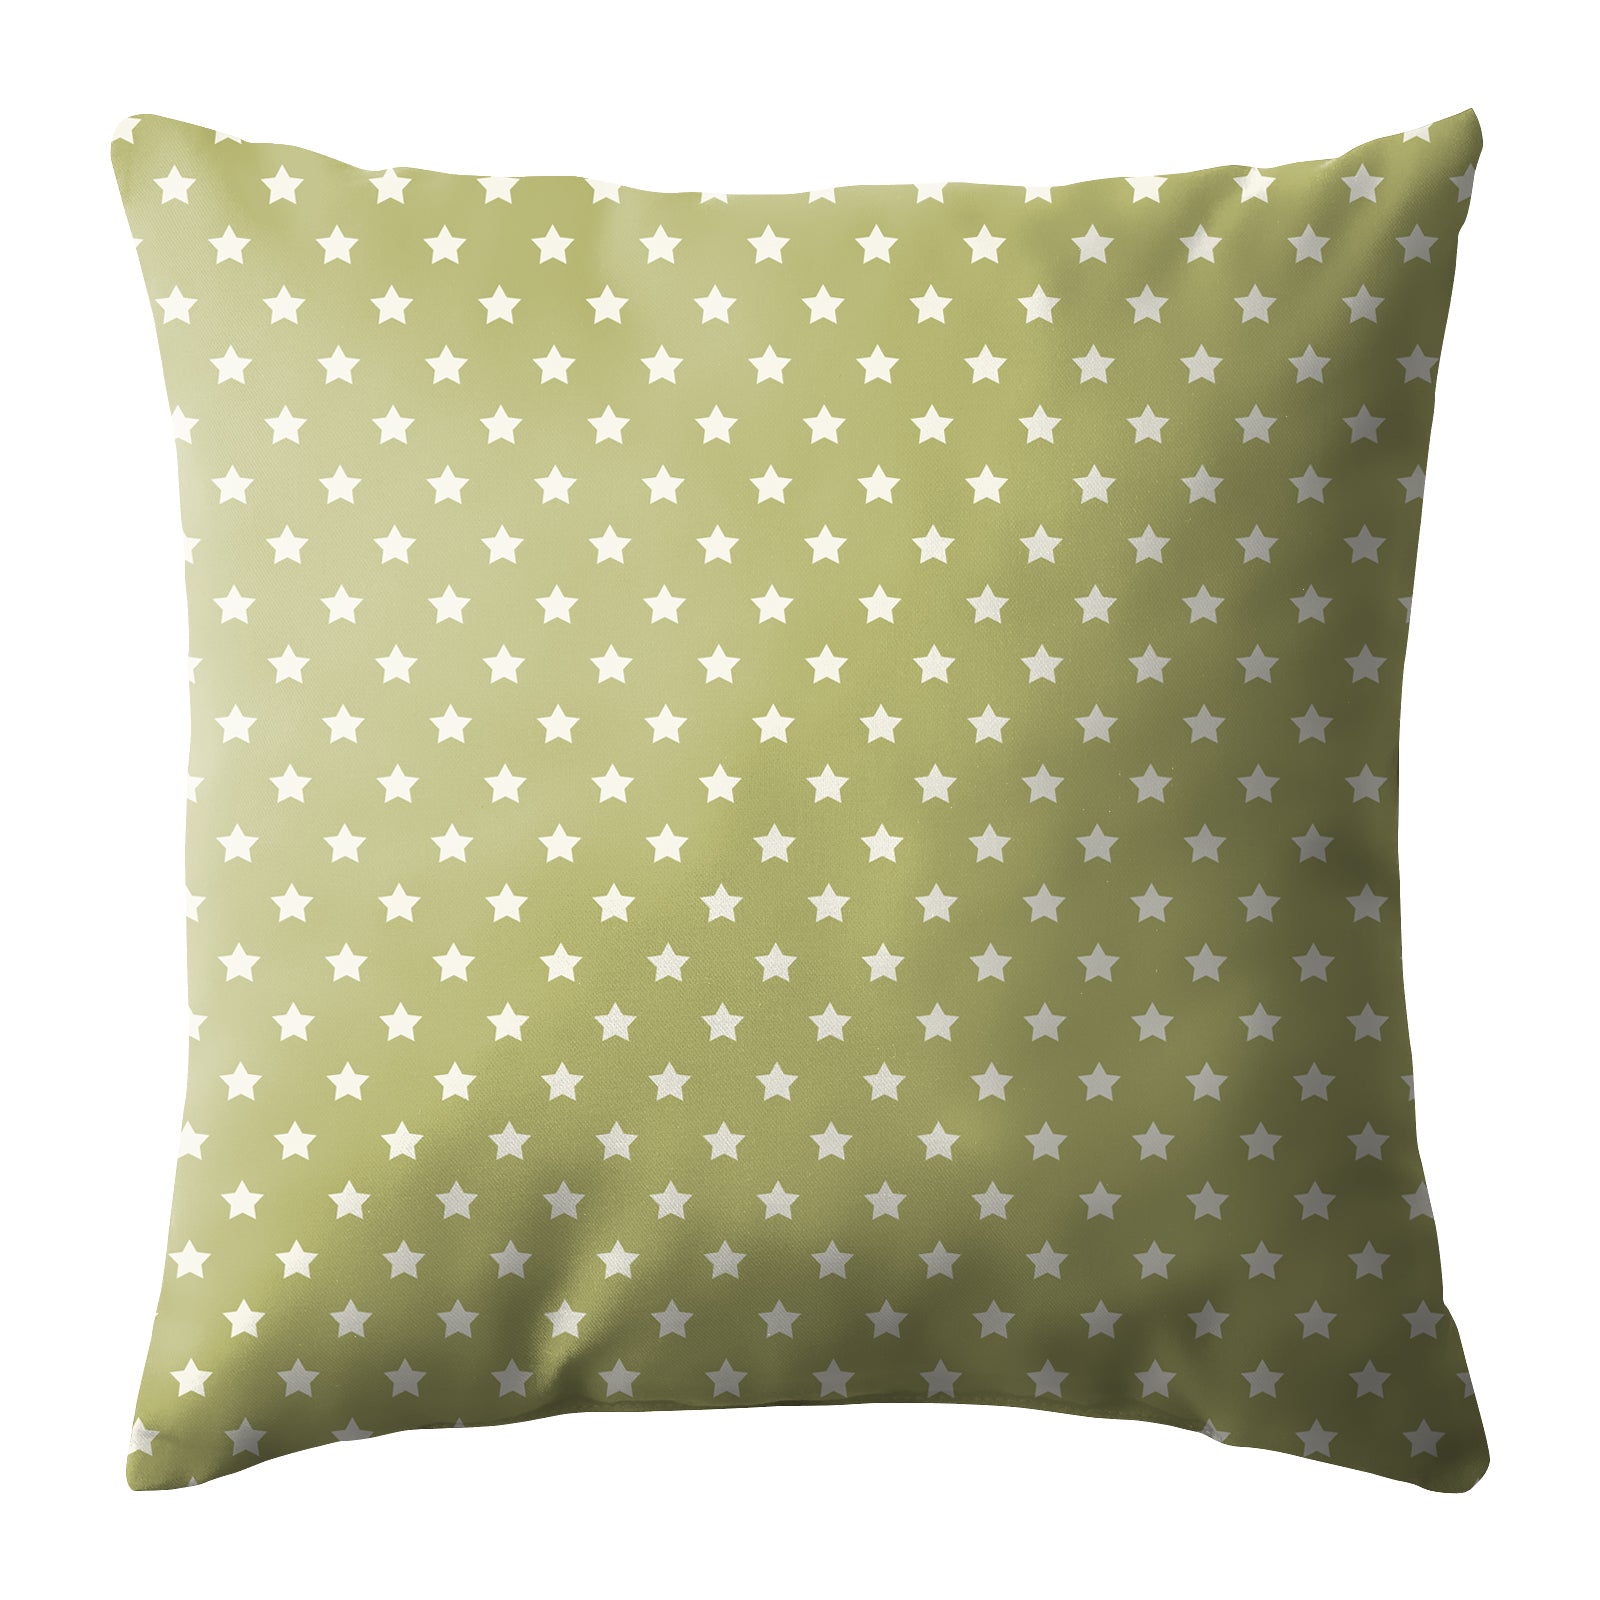 Spring Gallery Olive Green (16X16 INCH) Digital Printed Cushion Cover